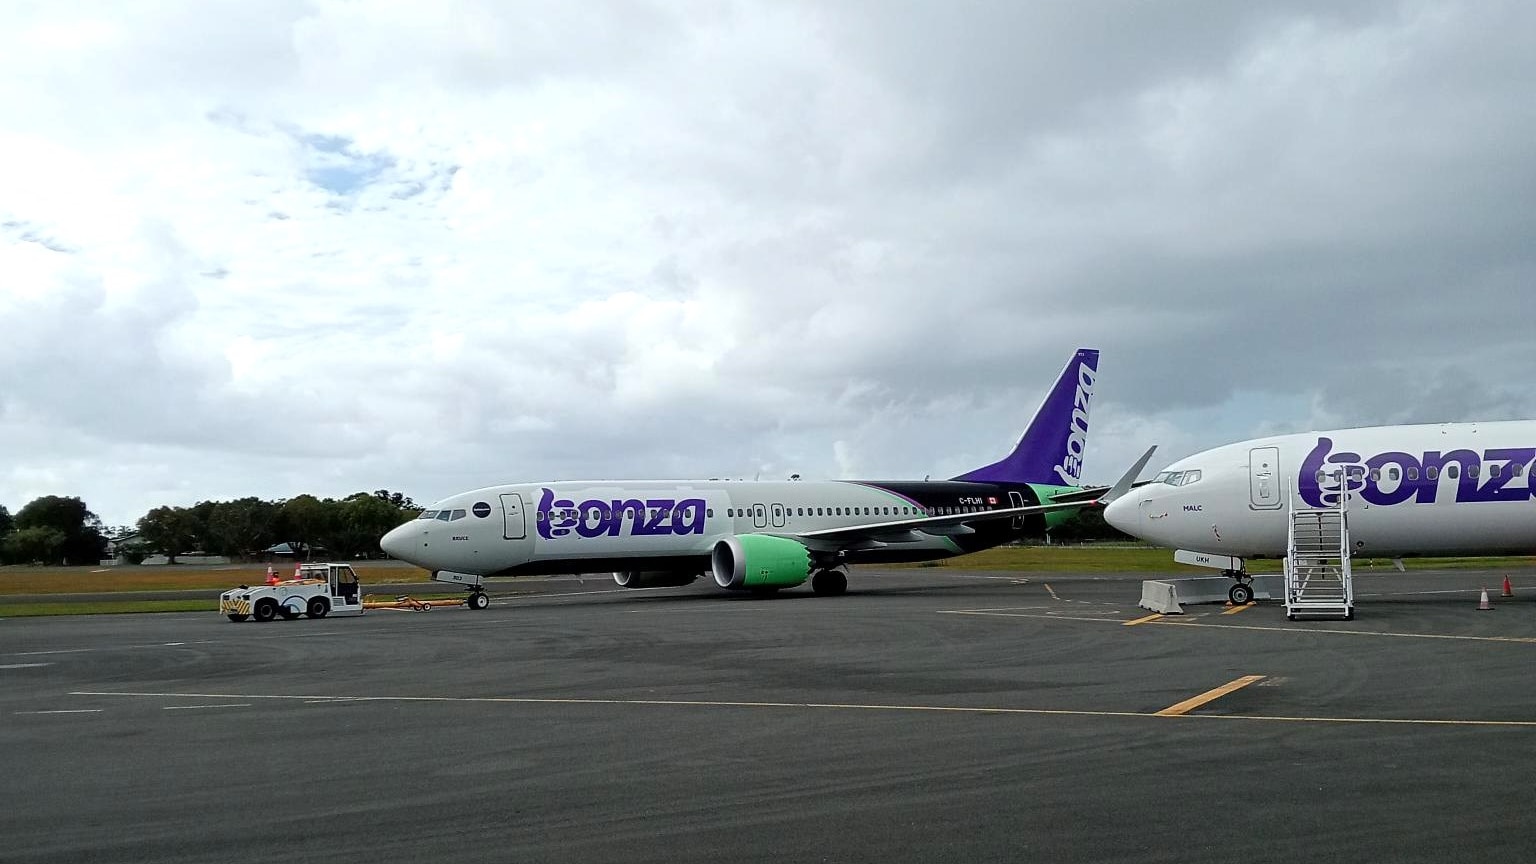 bonza's aircraft leave the country after embattled airline's fleet repossessed